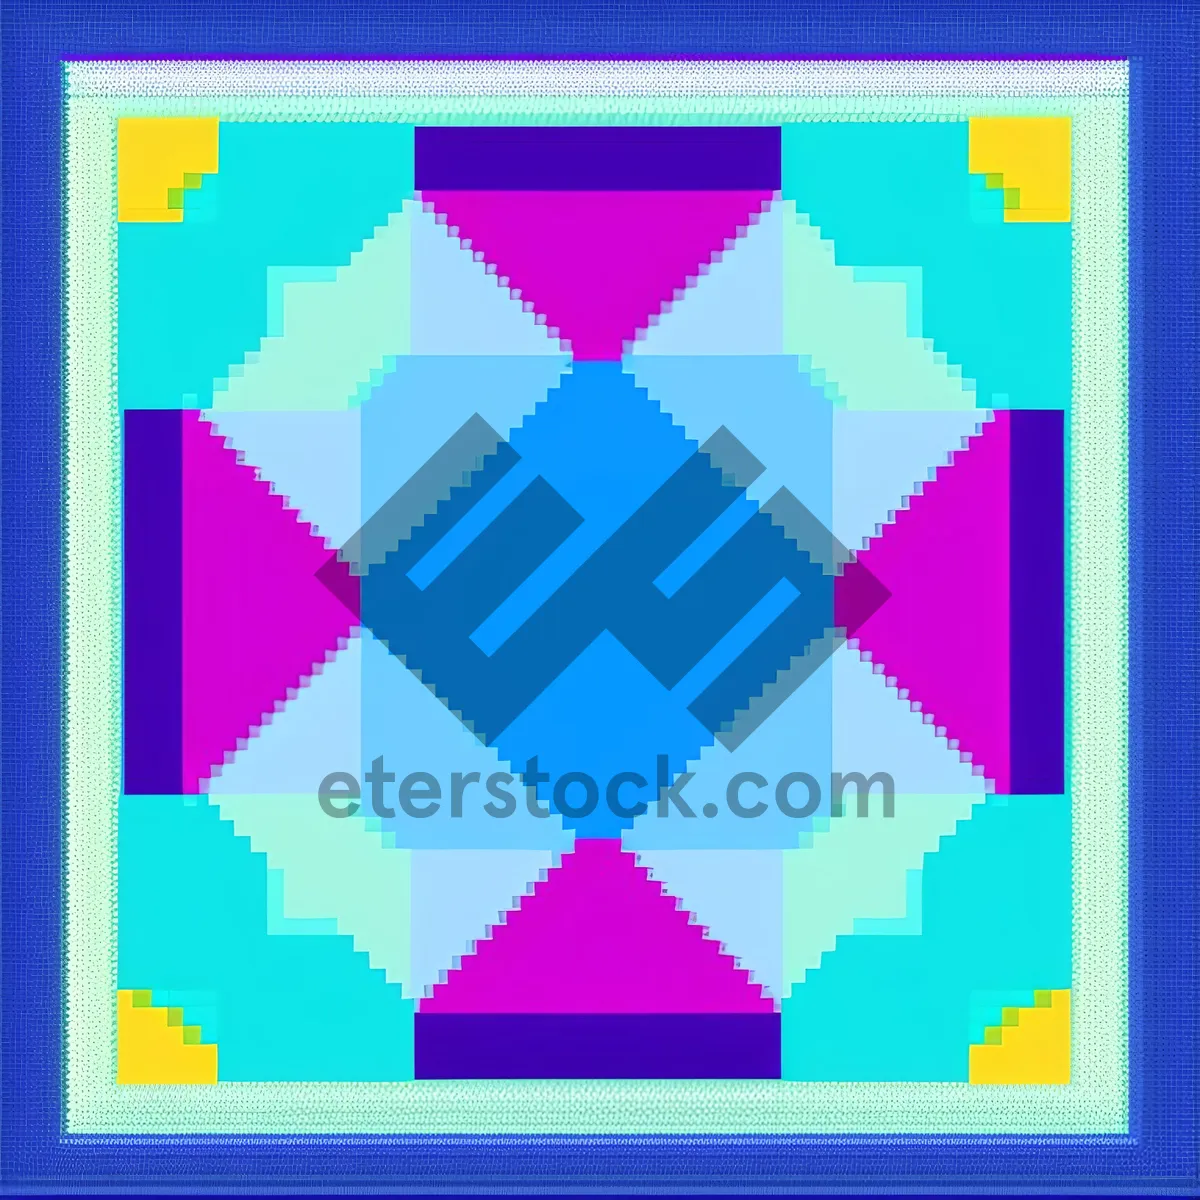 Picture of Colorful Mosaic Pattern: Artful, Decorative, and Seamless.